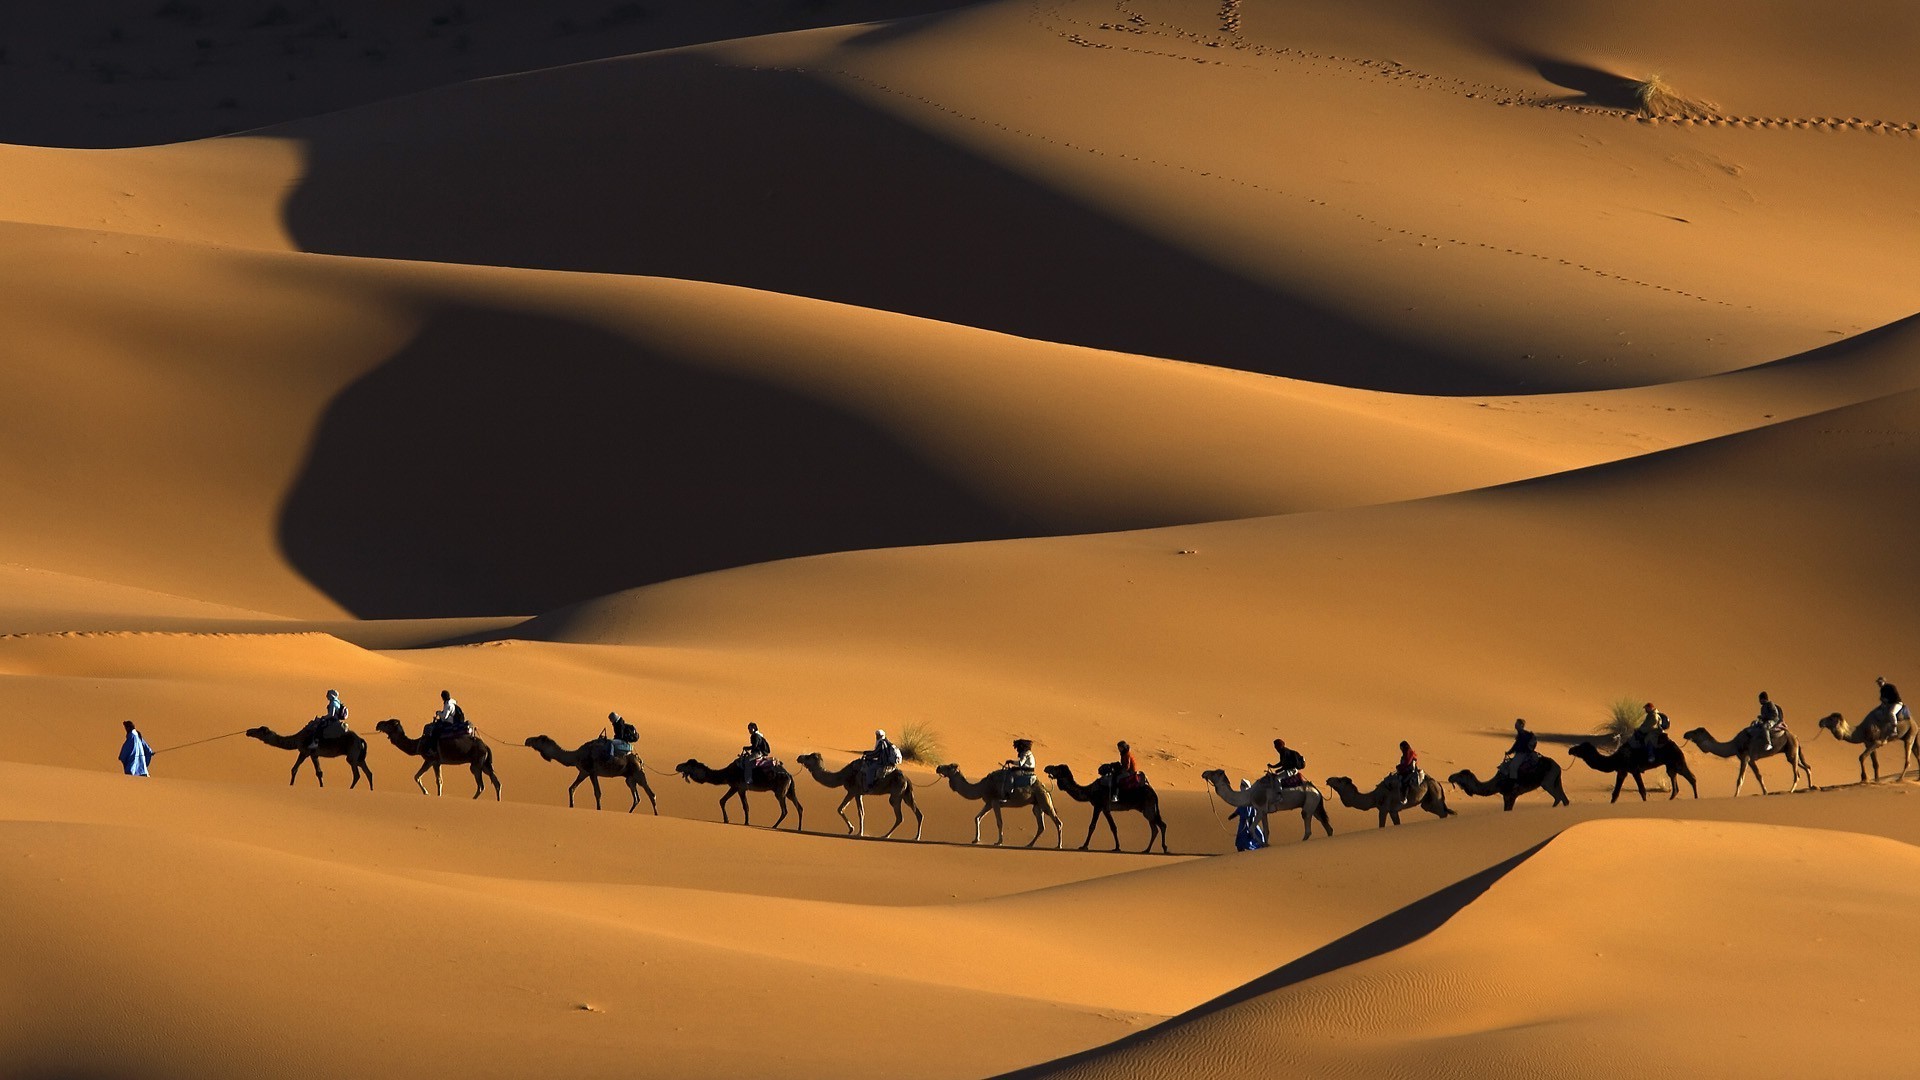 nature, Animals, Landscape, Camels, Morocco, Africa, Sand, Desert, Dune, People, Shadow, Footprints, Touaregs Wallpaper